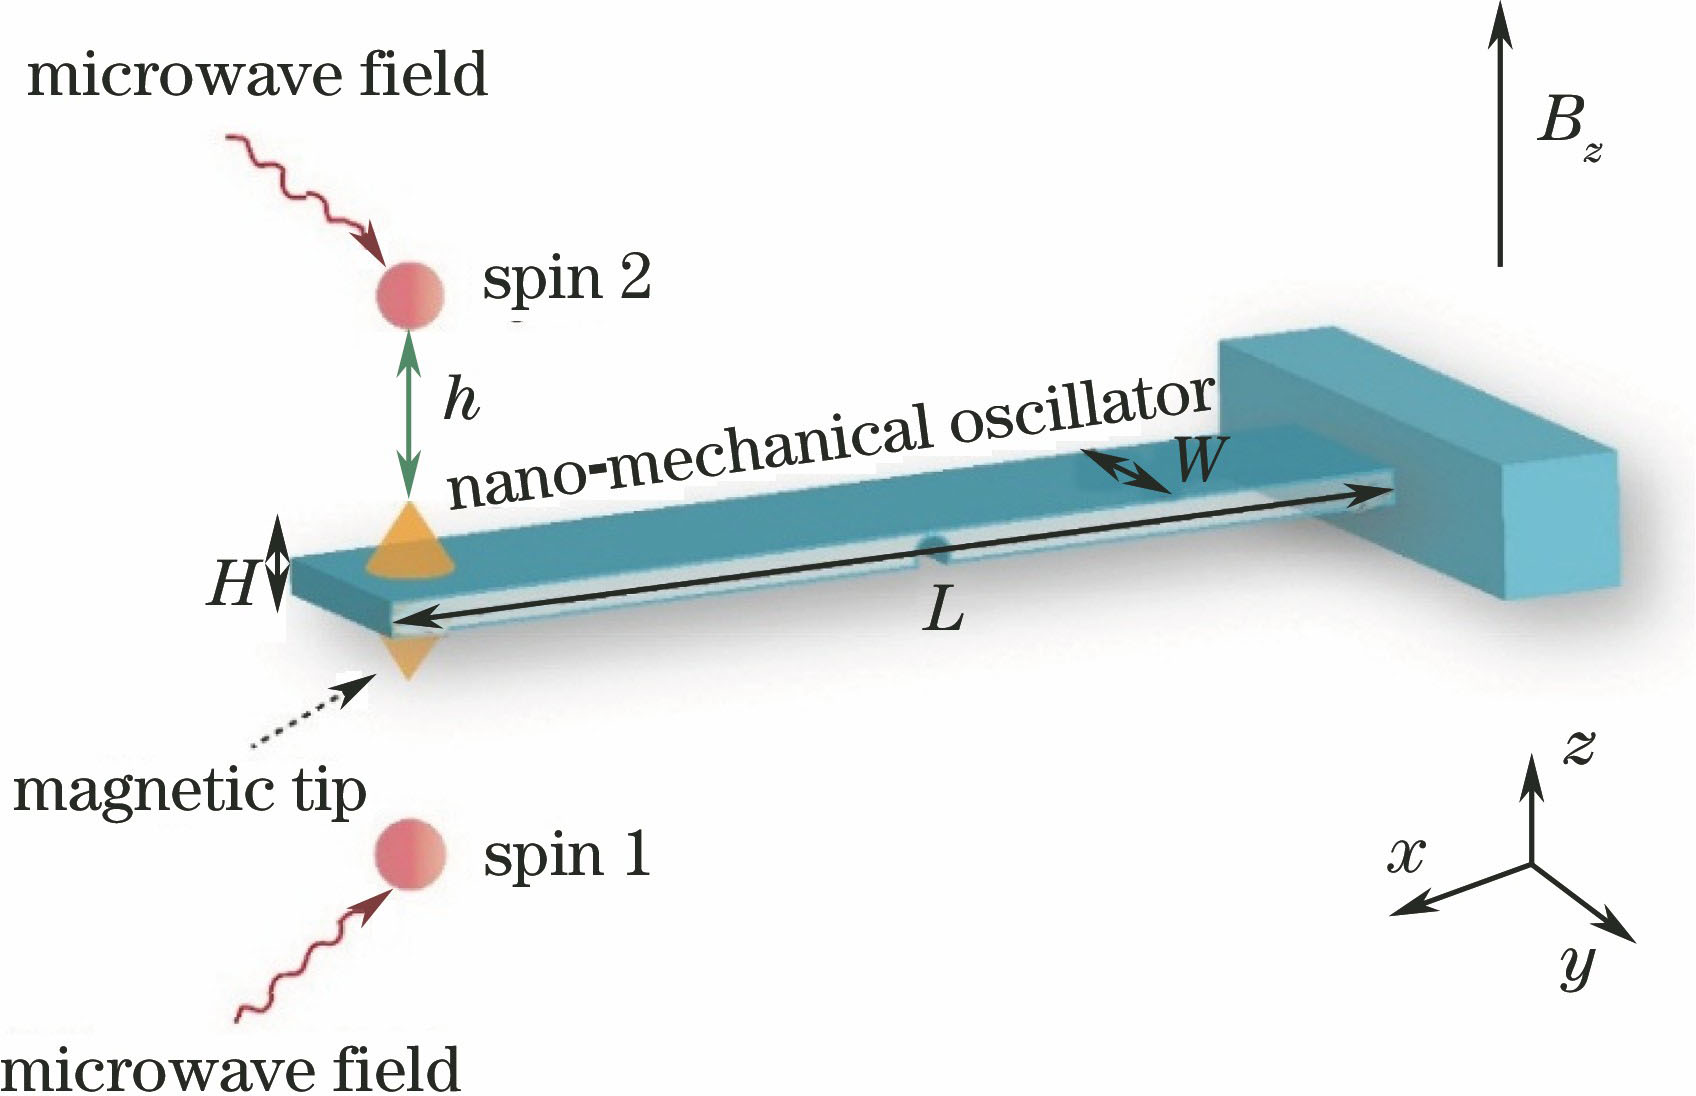 Schematic of coupling between double electric spins and nano-mechanical harmonic oscillator